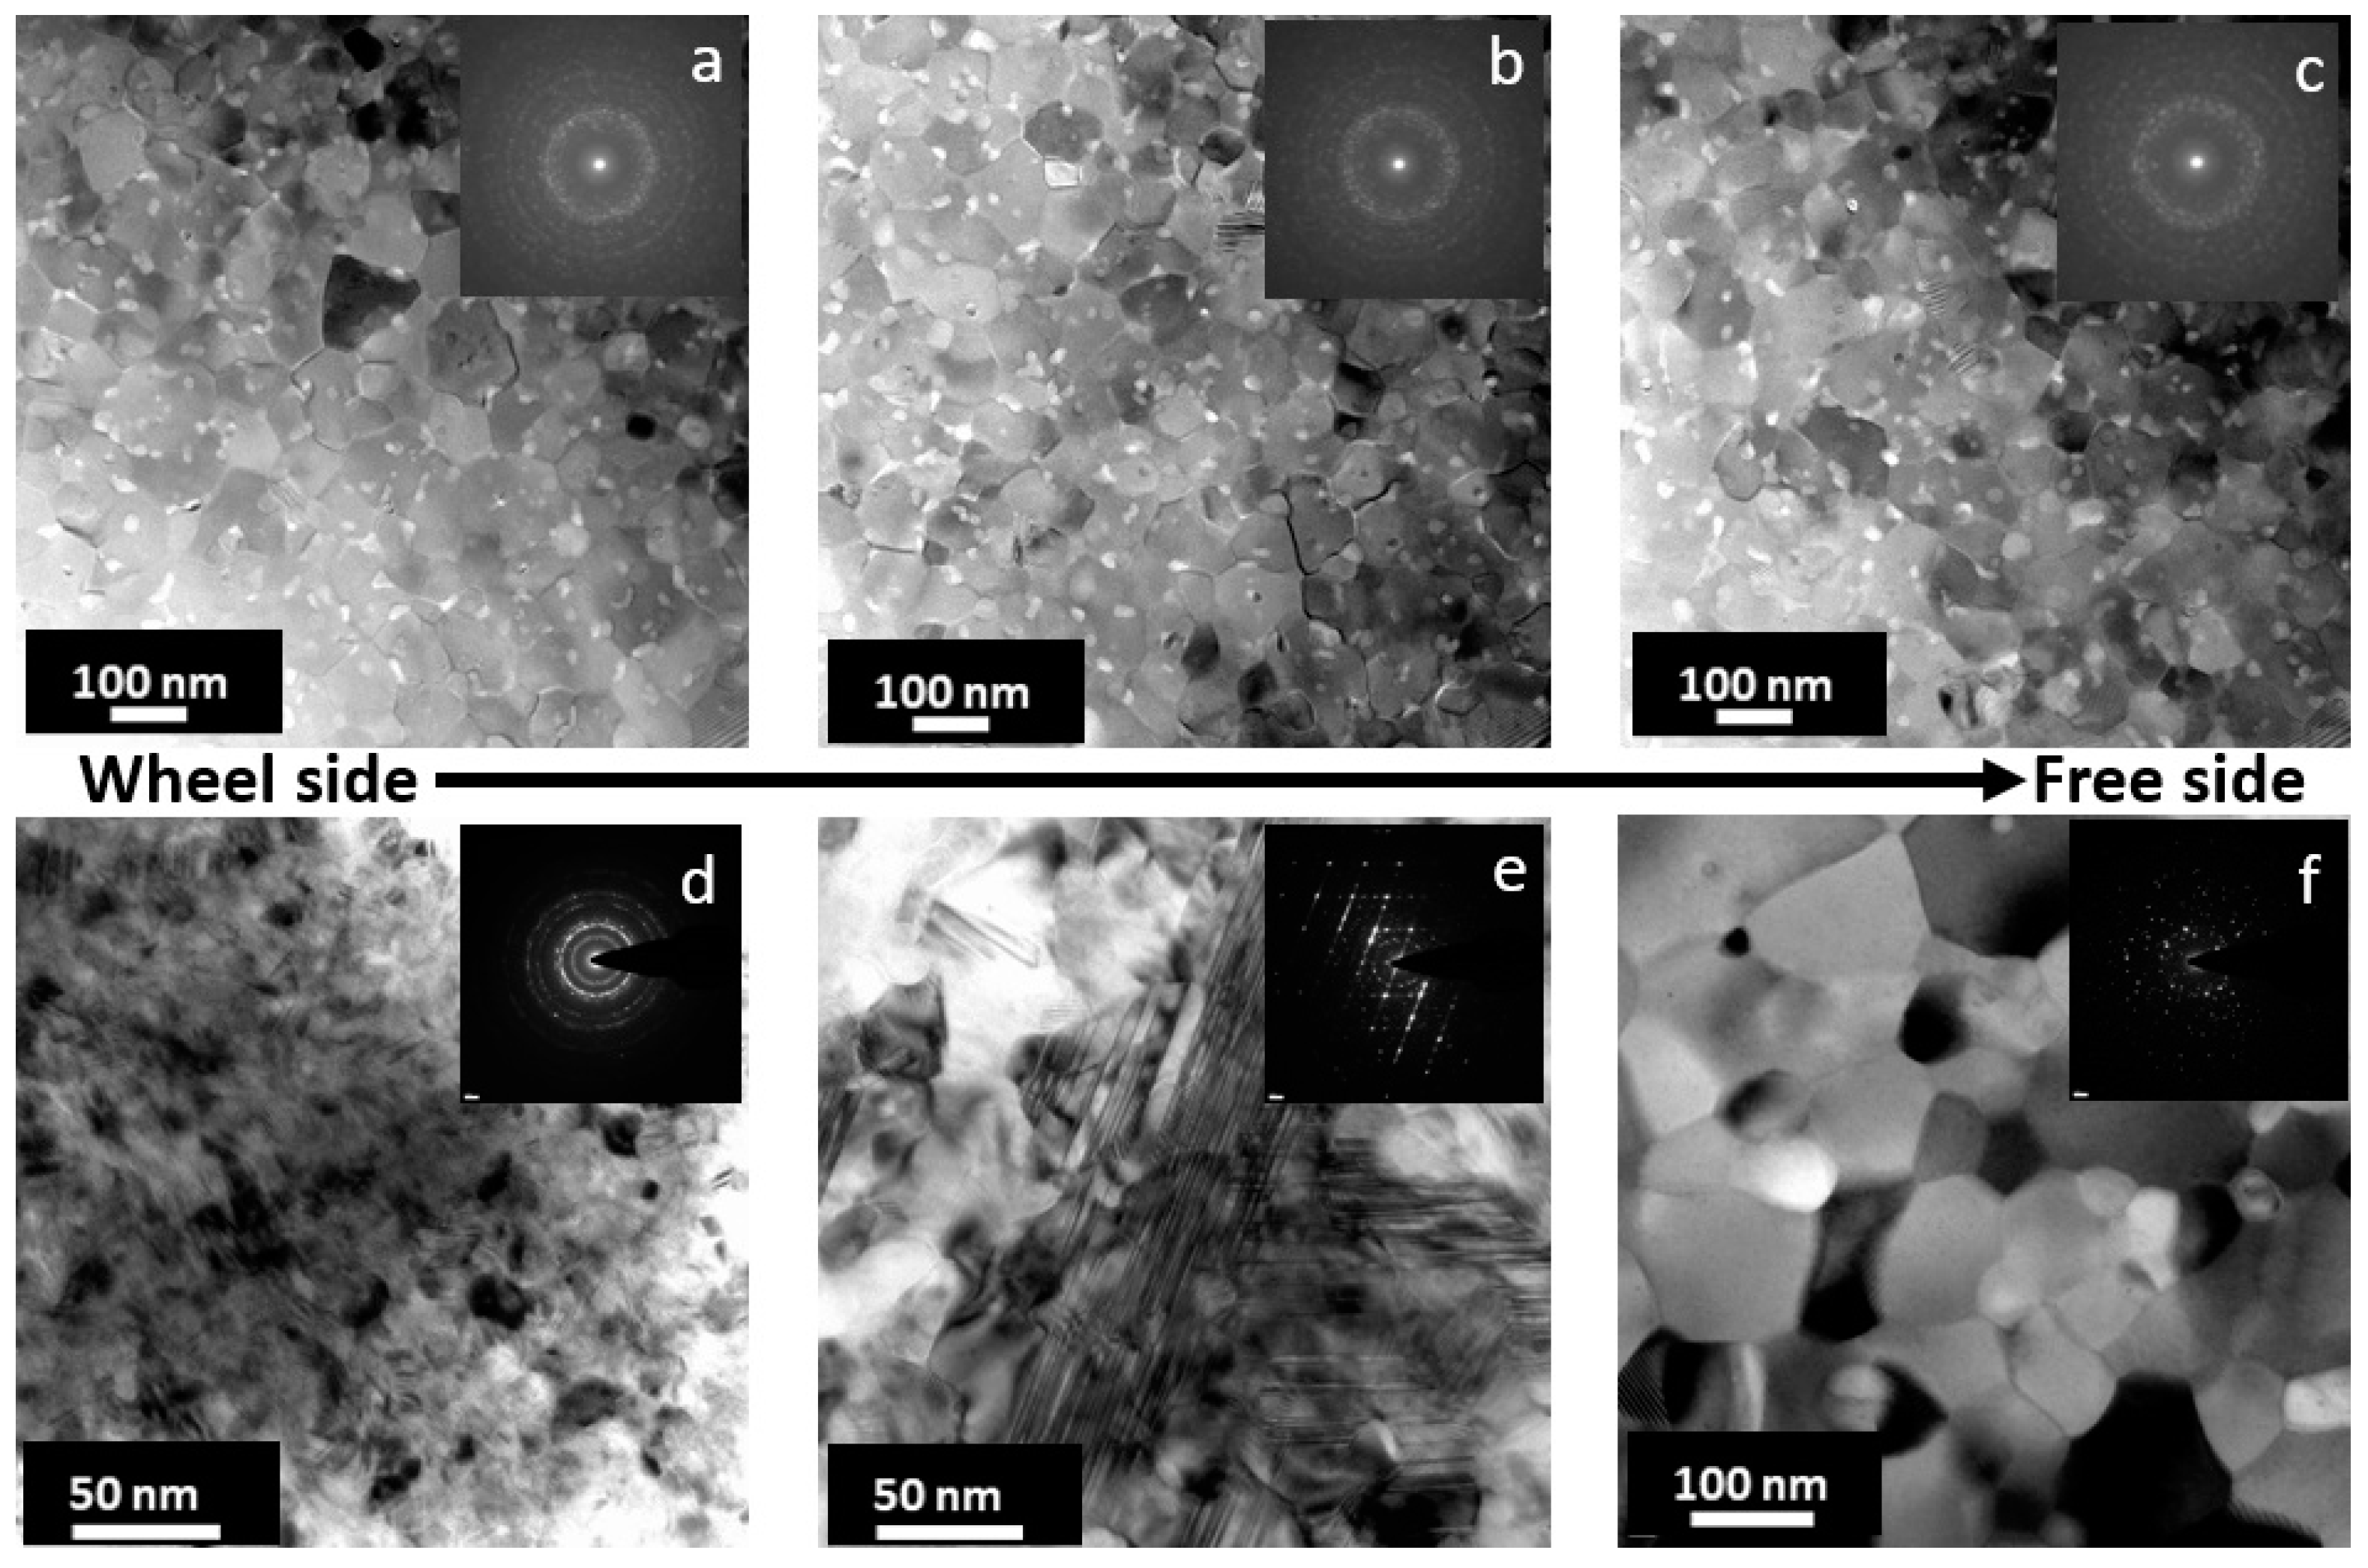 Surface microstructure of magnets: a, b blank magnets(700 °C); c, d Pr